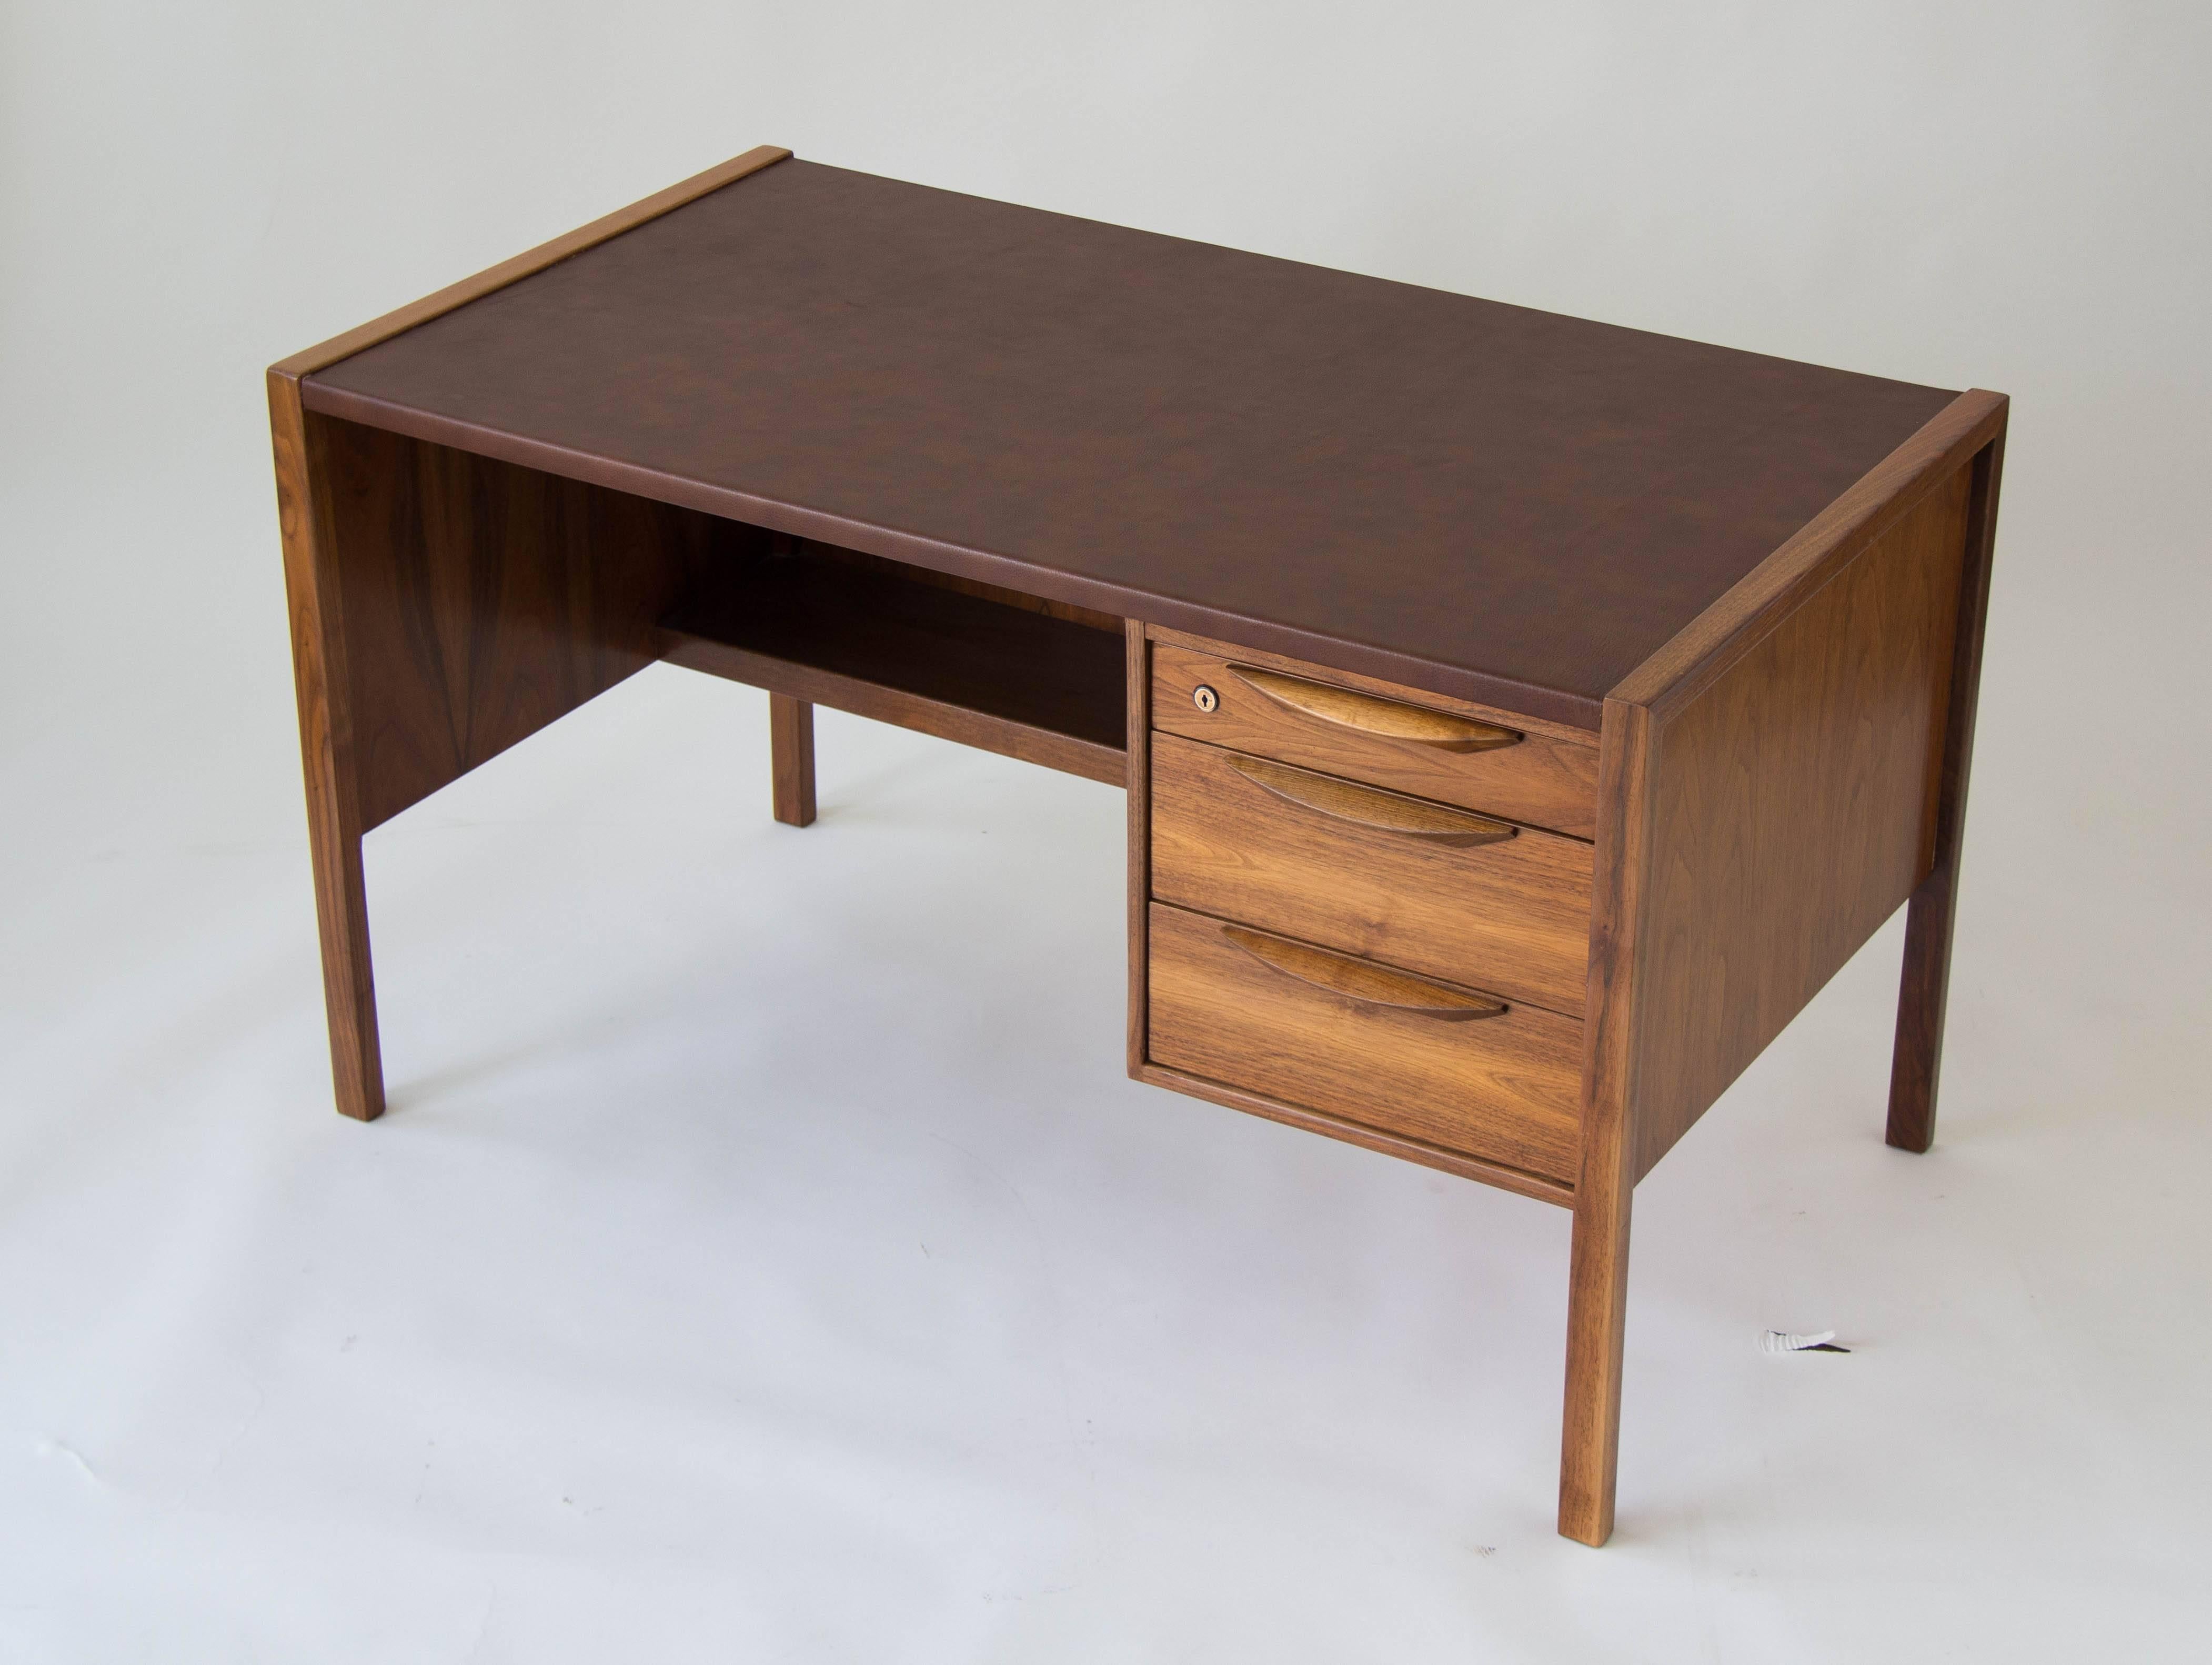 A modest walnut desk from Jens Risom with three drawers on the right-hand side, and a leather writing surface. Each drawer has a sculpted walnut pull and the top drawer locks for secure storage. Finished walnut panels cover the sides and back of the